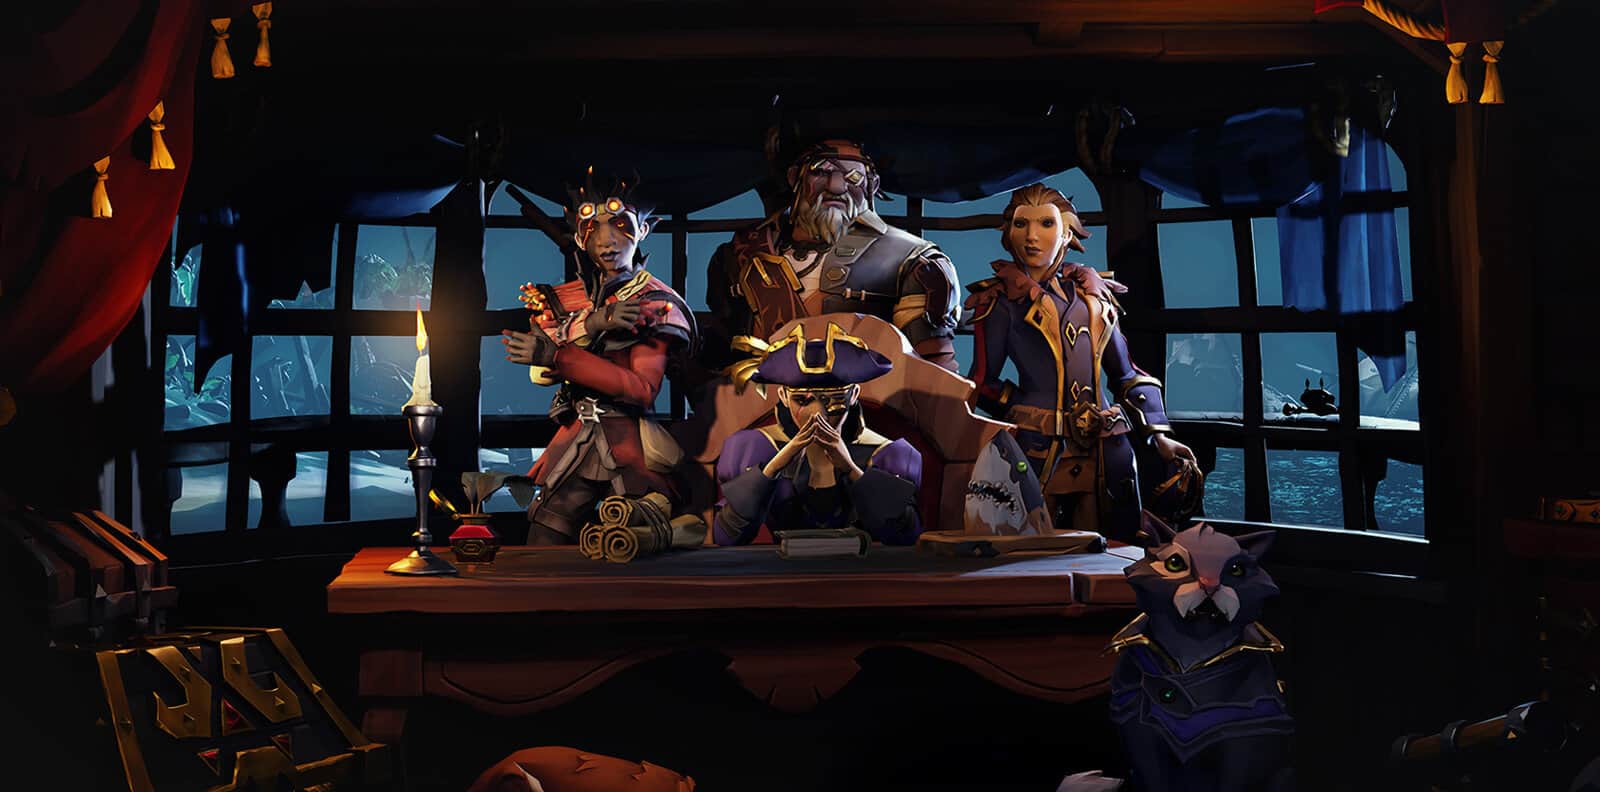 Sea of Thieves 2.6.0 Update Patch Notes